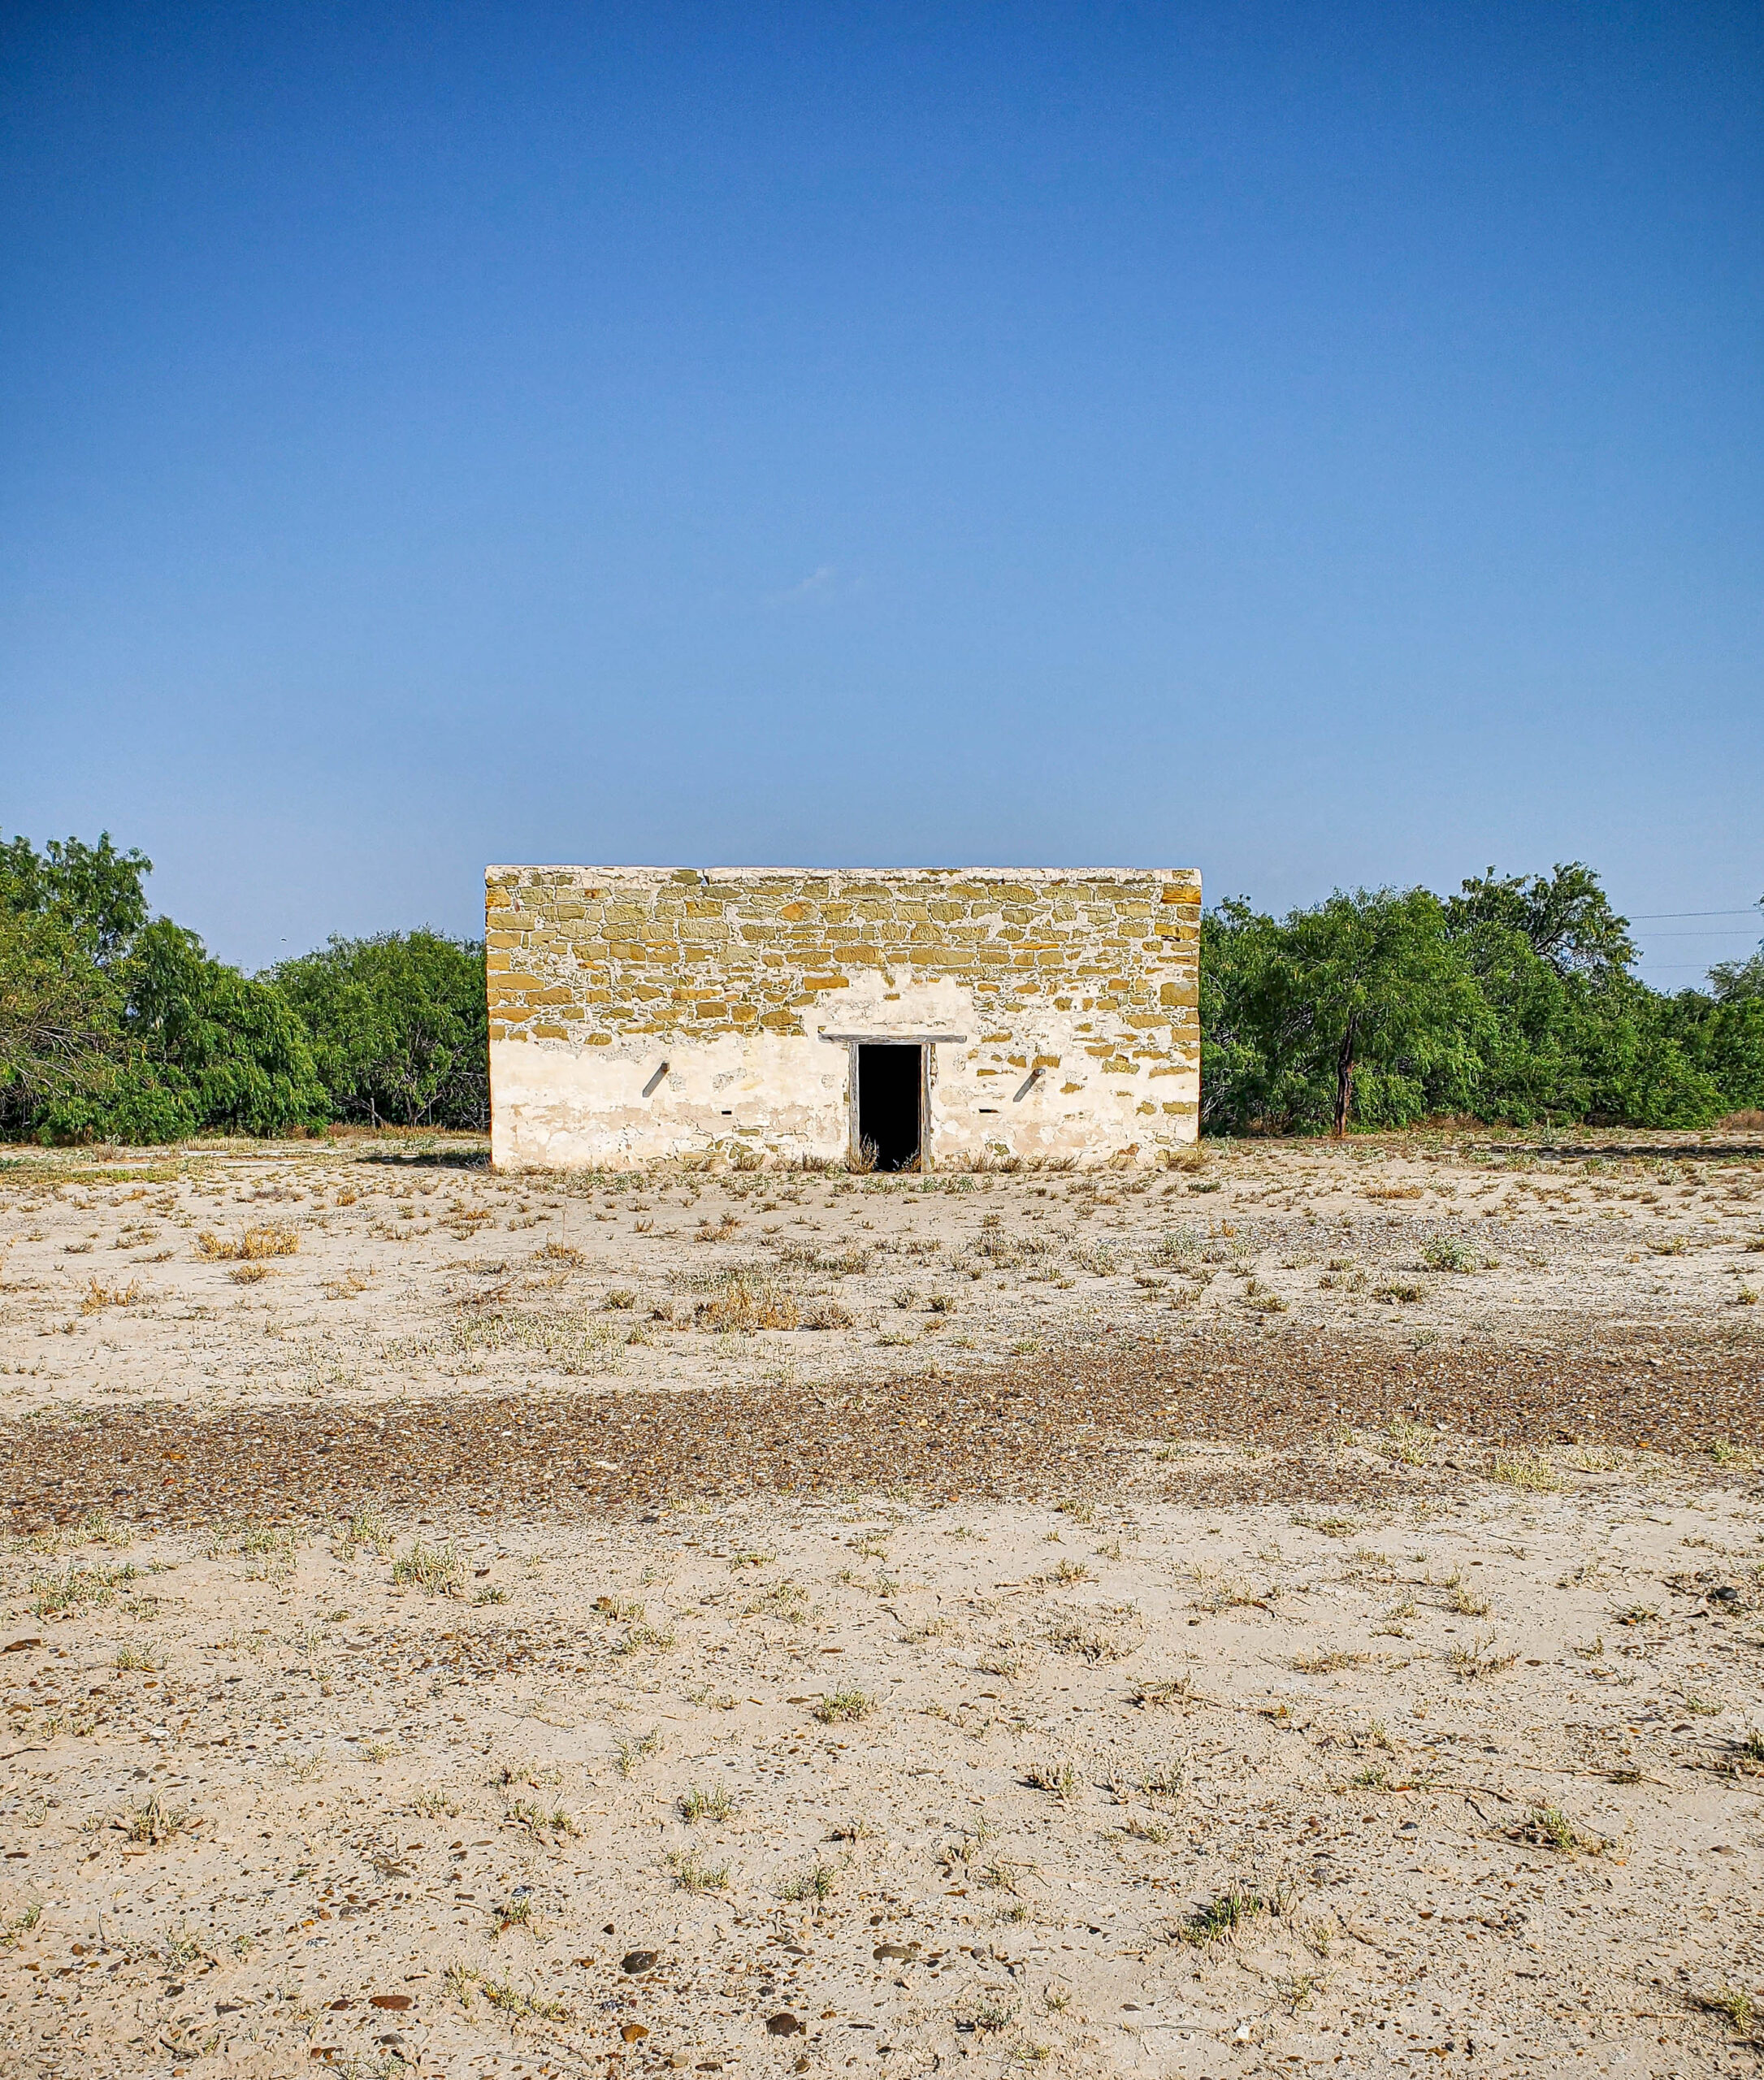 In search of 18th century town and ranch life in South Texas